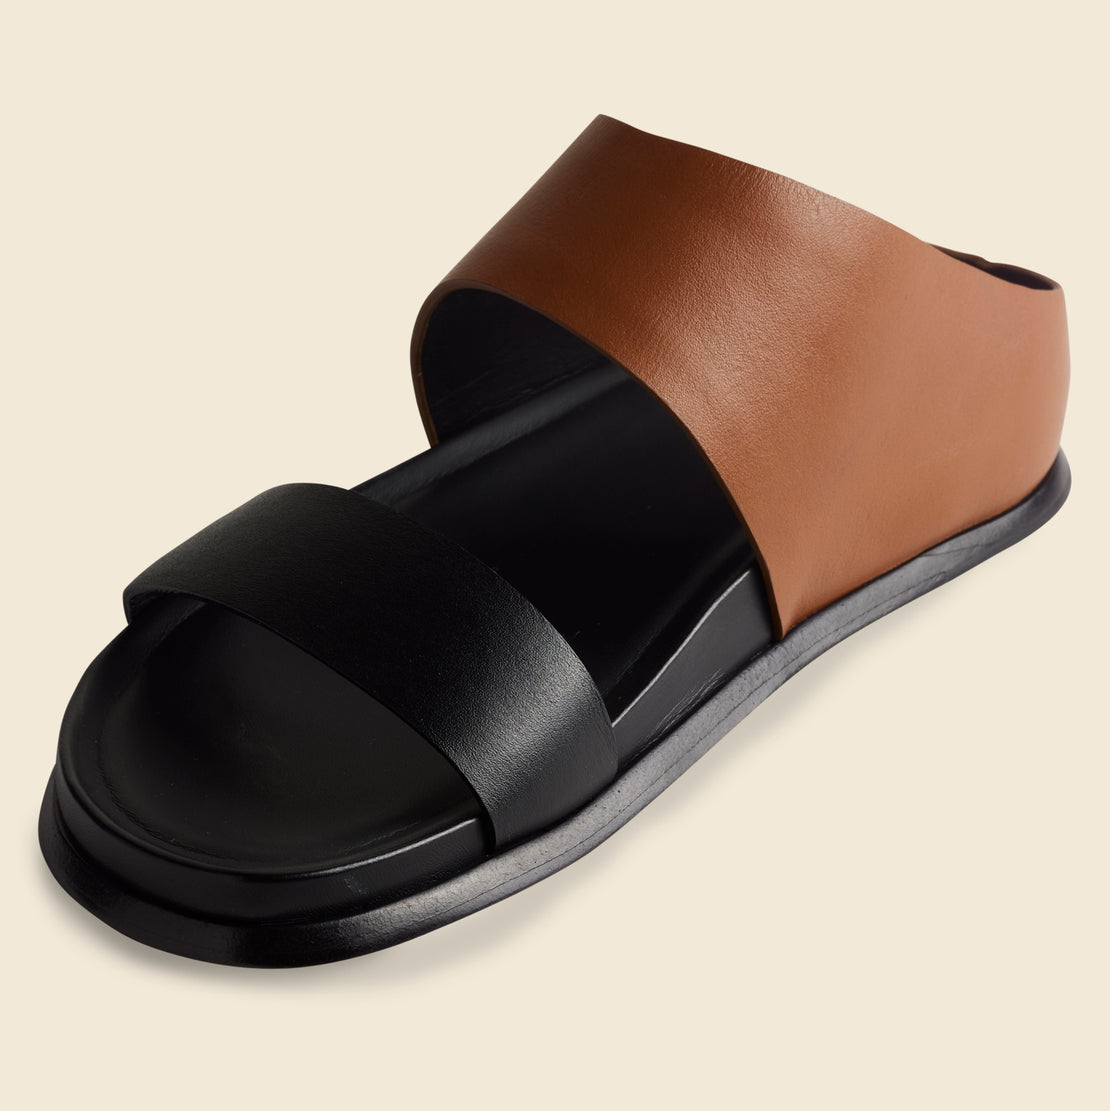 Formosa Slide - Black/Brown - Wal & Pai - STAG Provisions - W - Shoes - Sandals